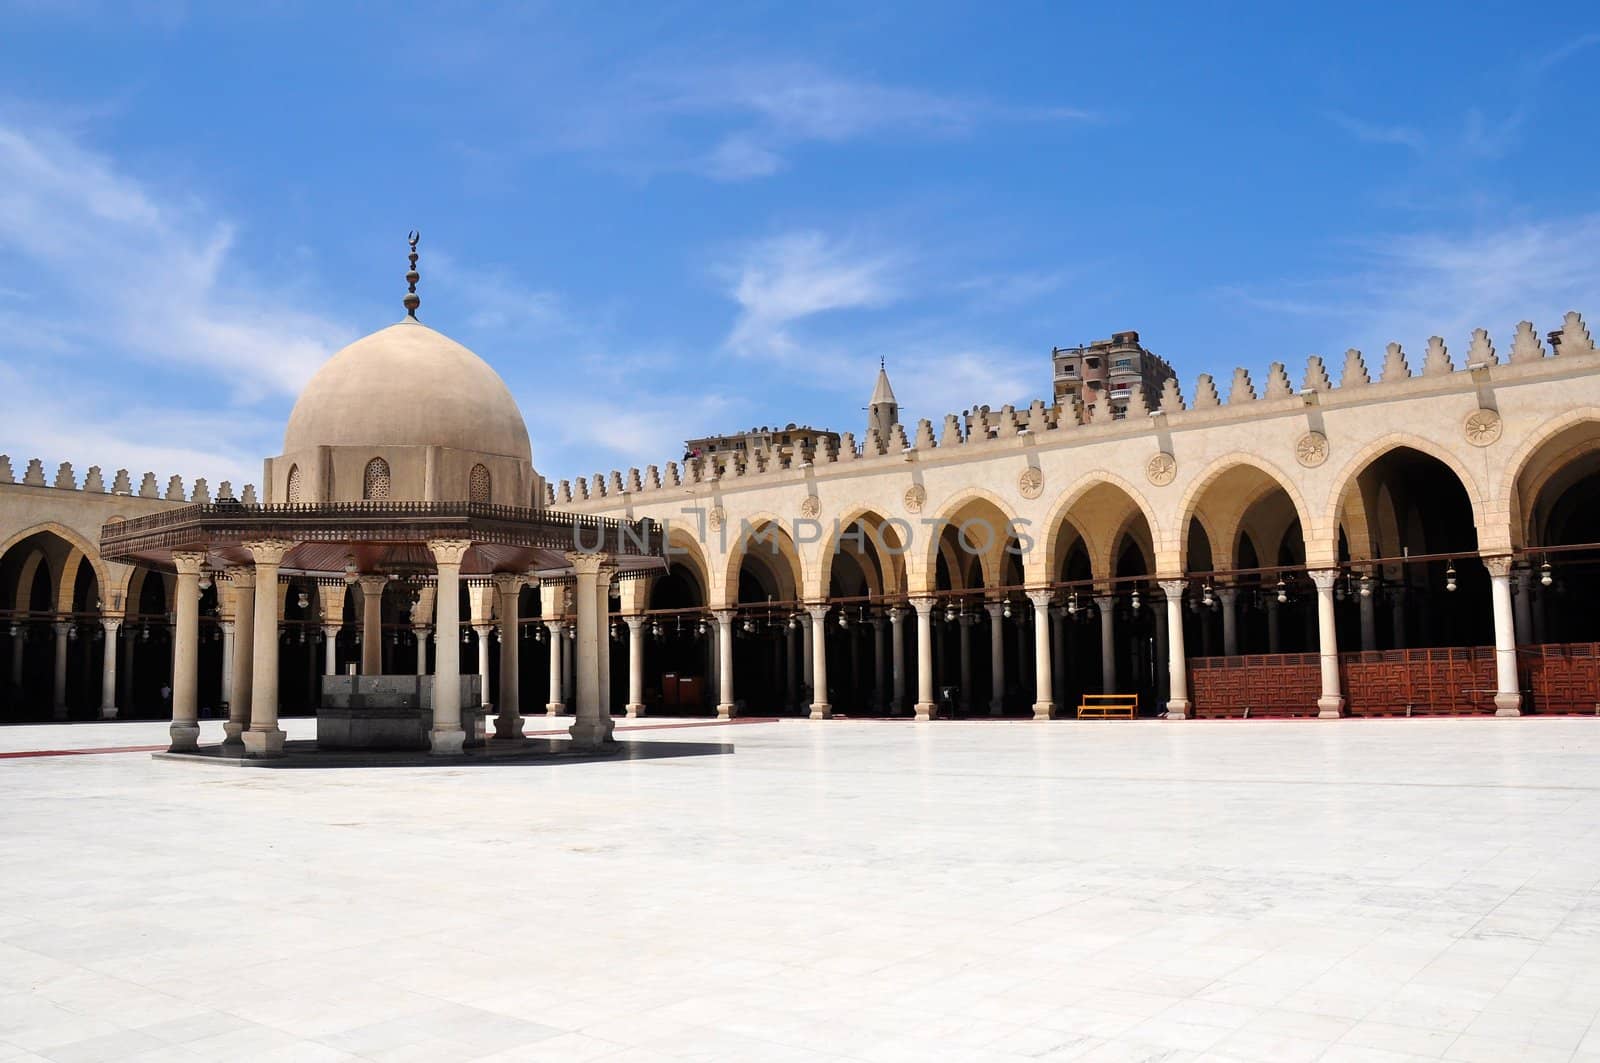 Amr ibn al-As Mosque in Cairo, Egypt by ruigsantos